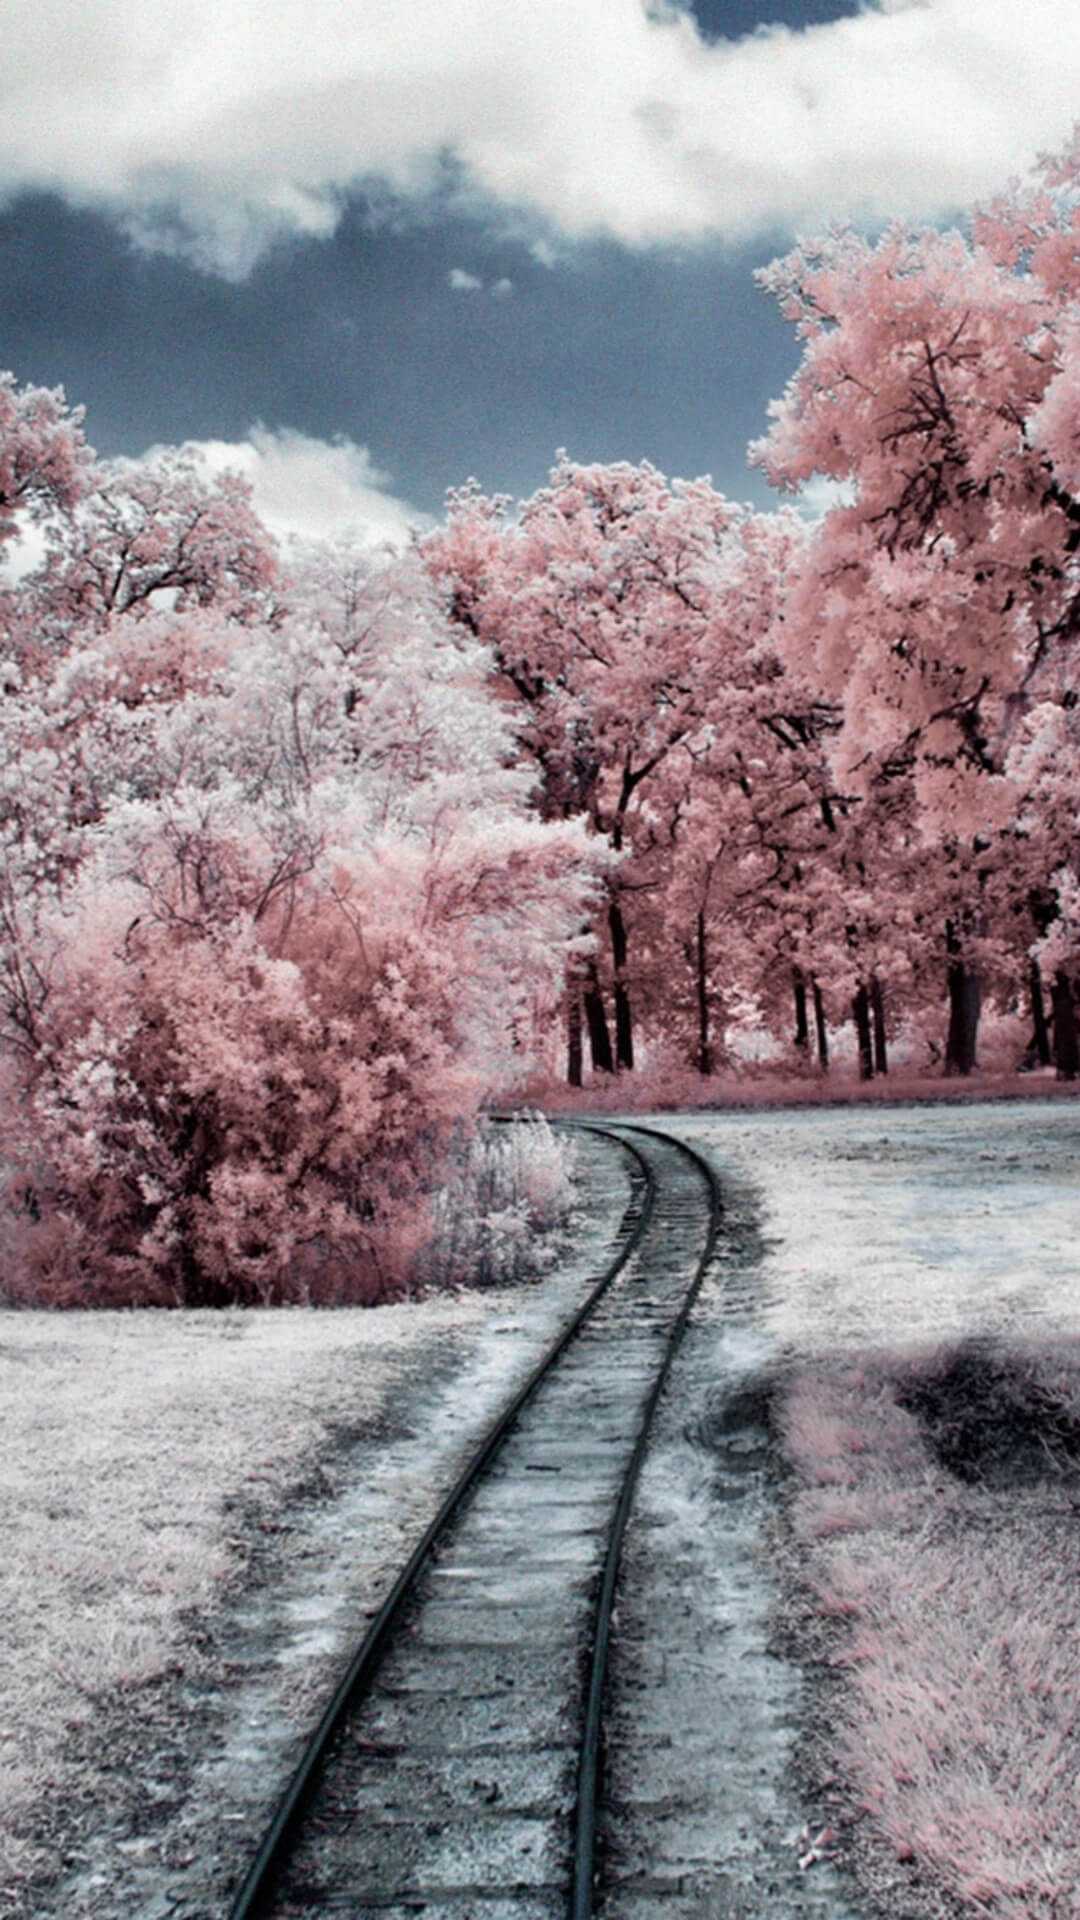 A train track going through some trees - Rose gold, snow, winter